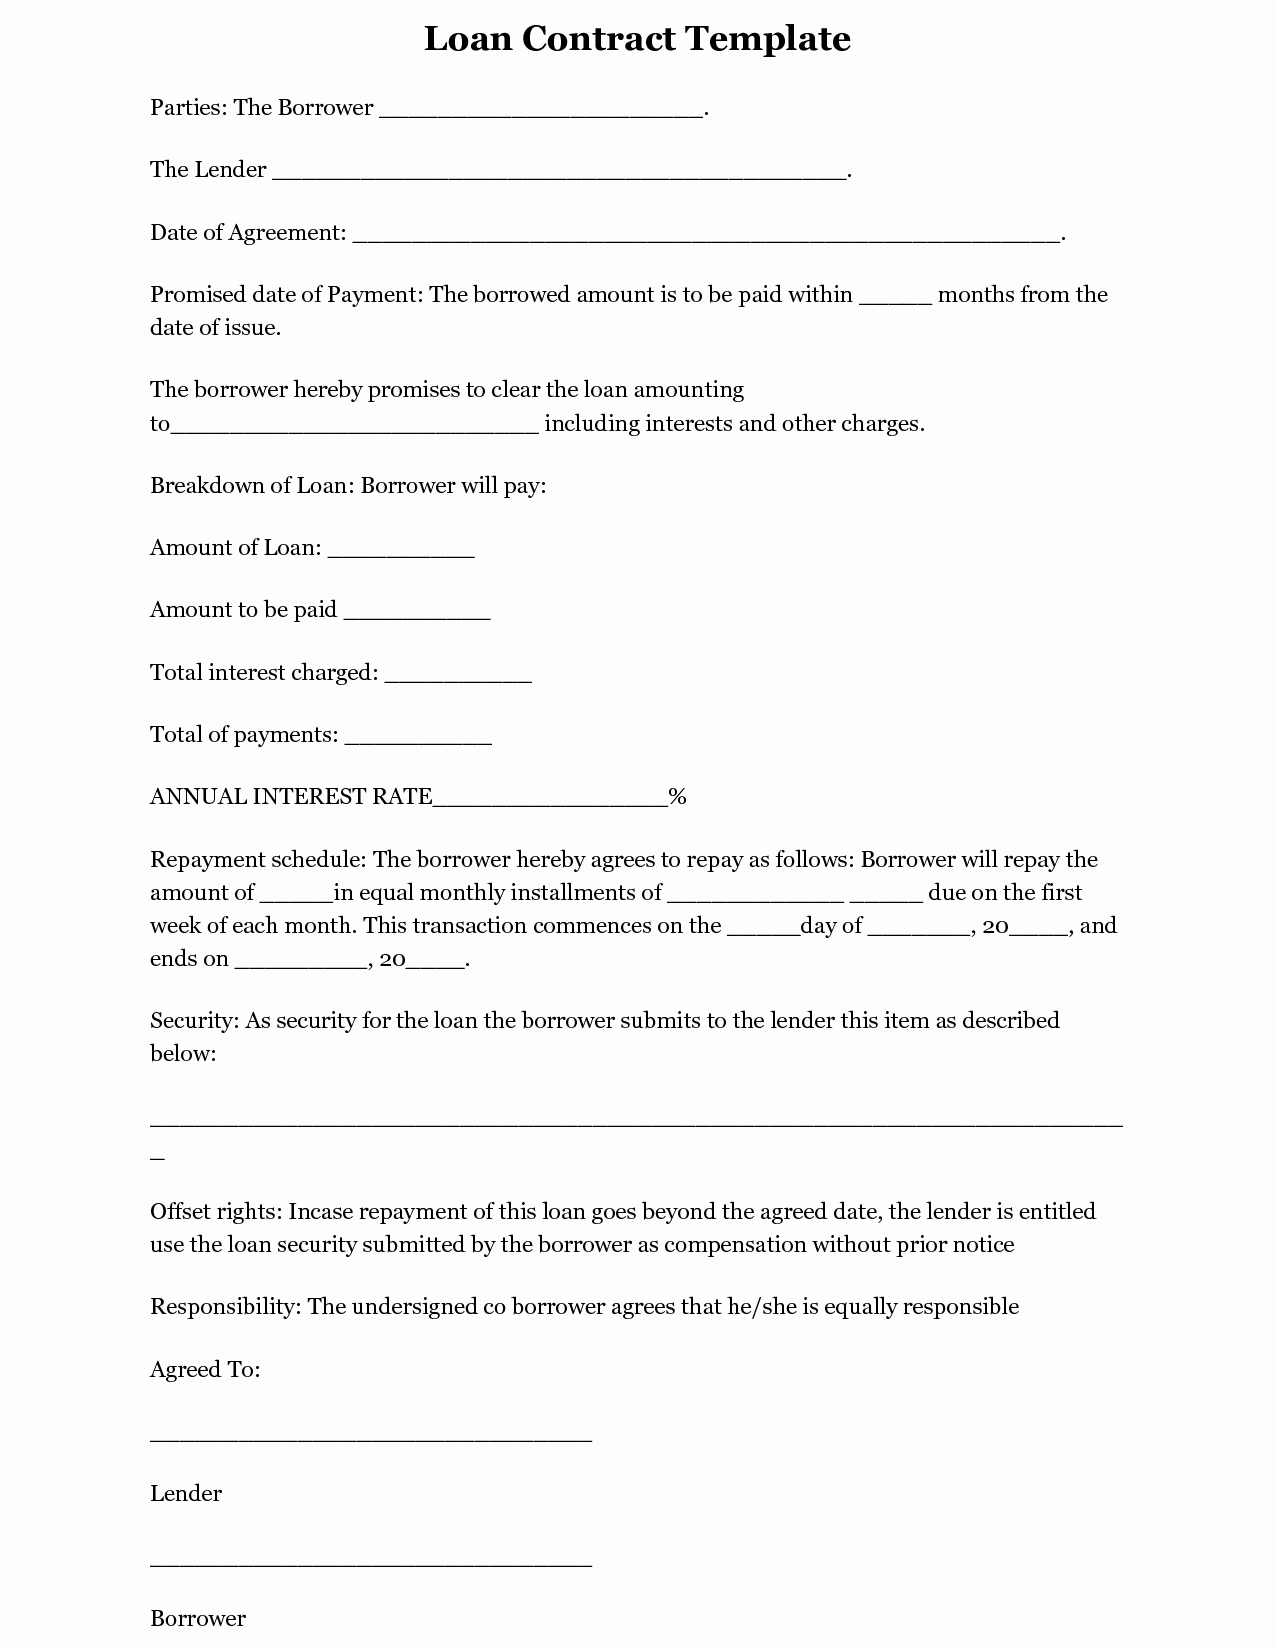 Template for Loan Contract Elegant Printable Sample Loan Template form